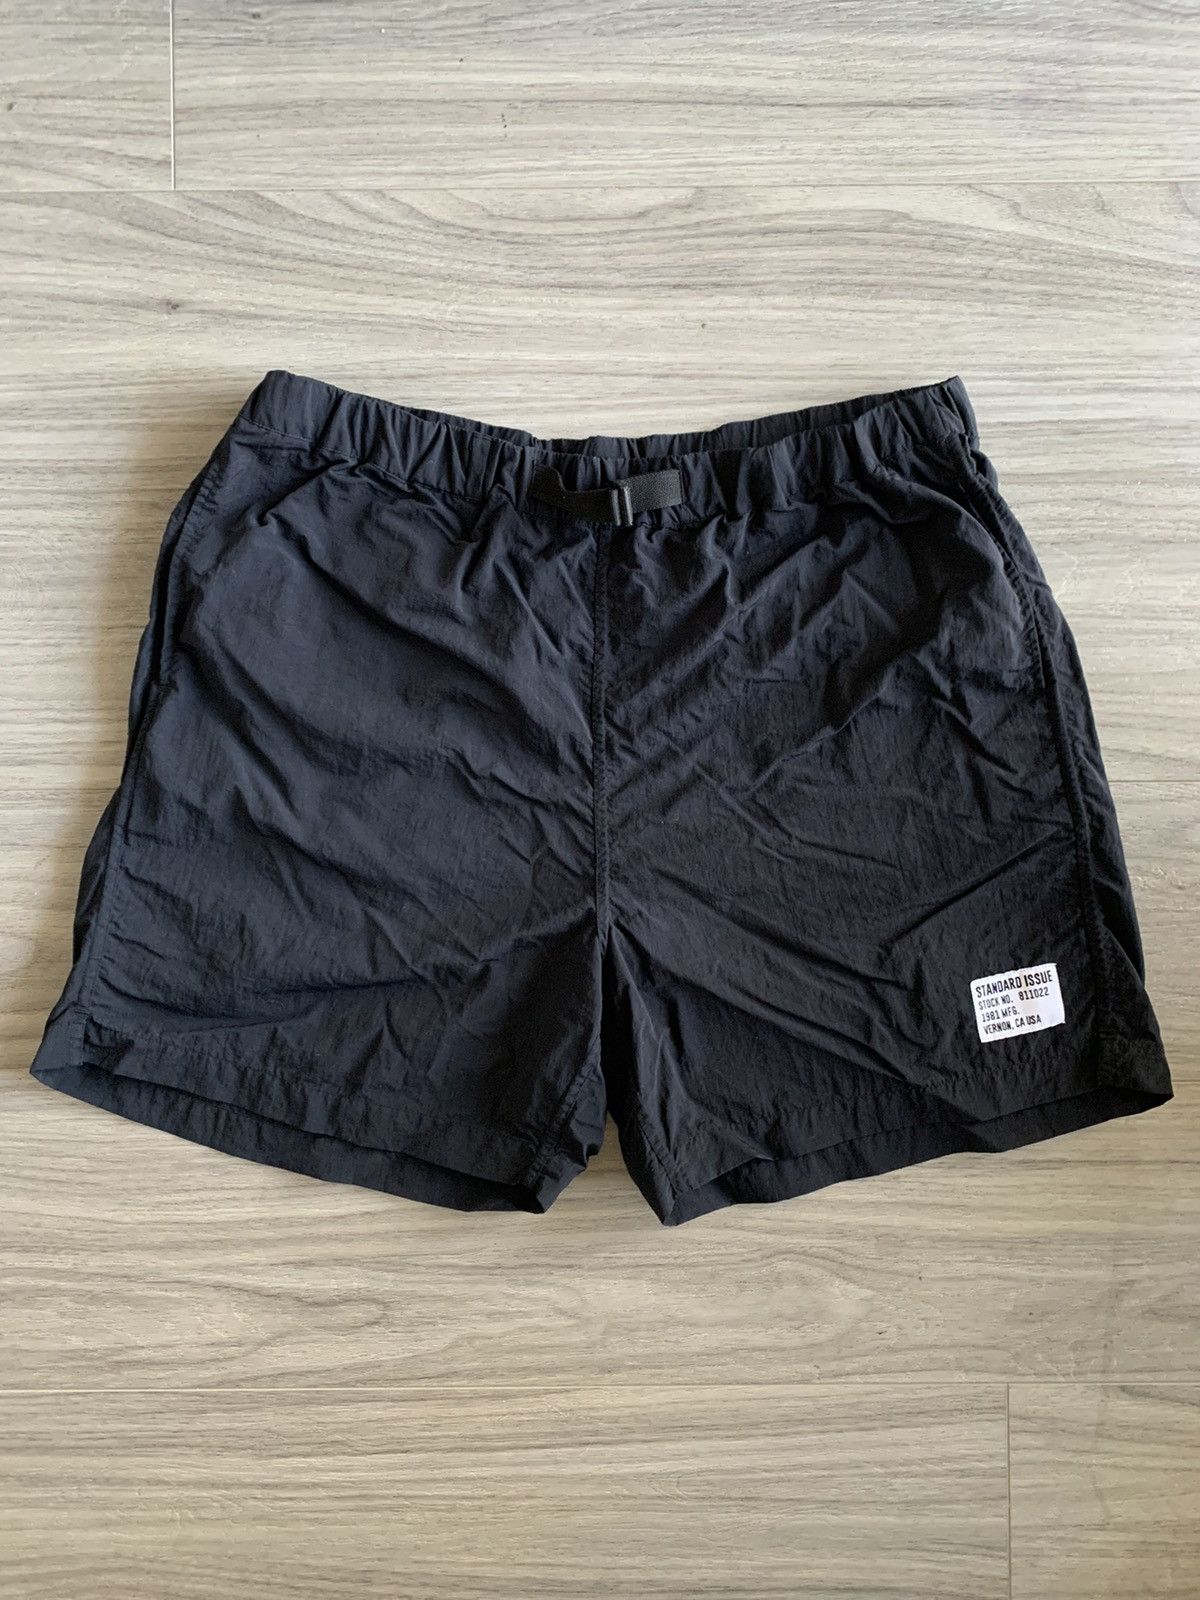 Standard Issue Nyc Standard Issue Tees Black AT Shorts Size US 34 / EU 50 - 1 Preview